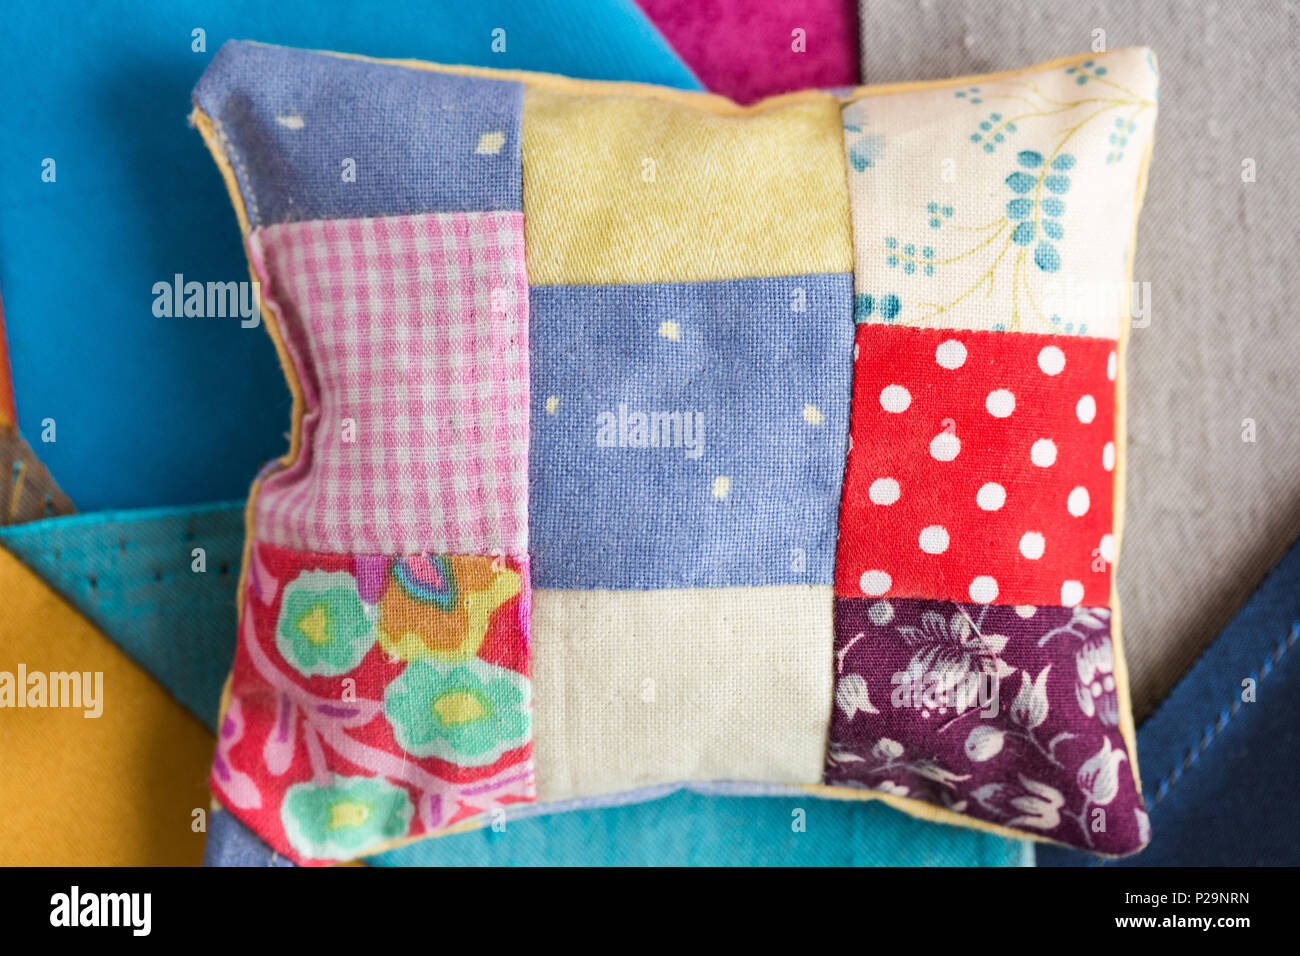 patchwork, quilting, sewing, tailoring and fashion concept - close-up beautiful colorful stitched cushion, macro on pillow with background of blue, gr Stock Photo